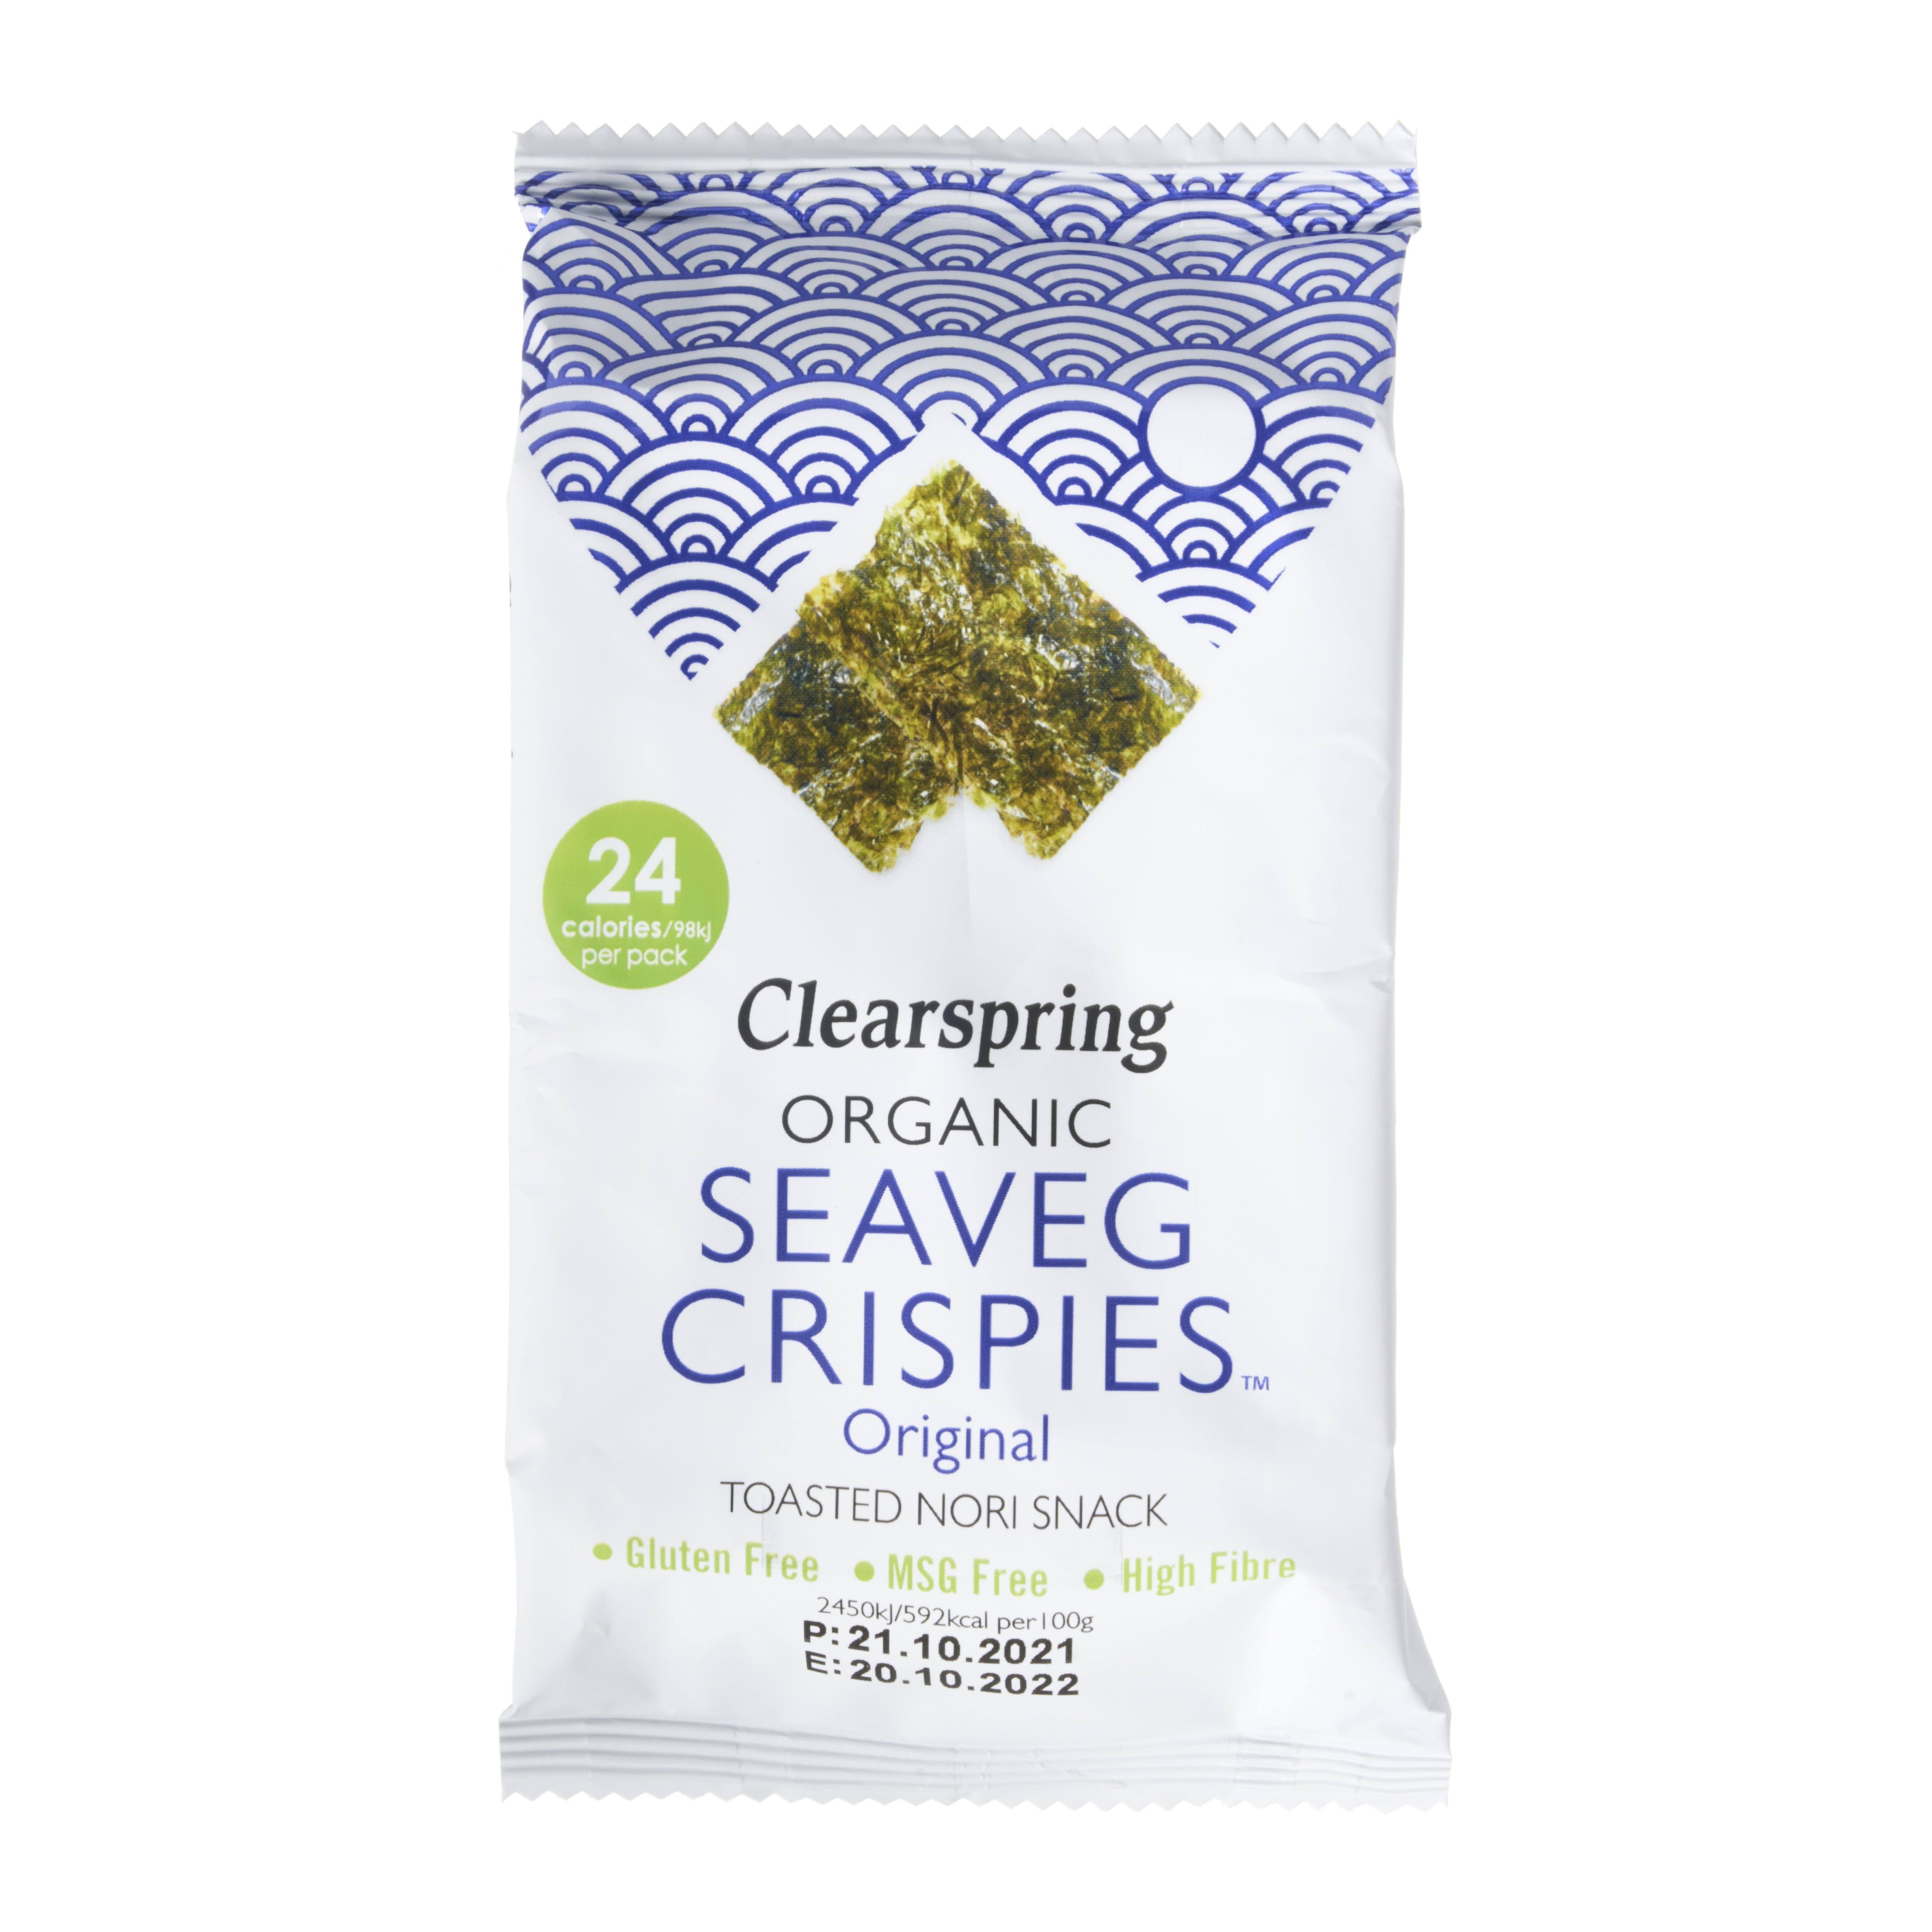 Clearspring Organic Seaveg Crispies Toasted Nori Snack - Ginger